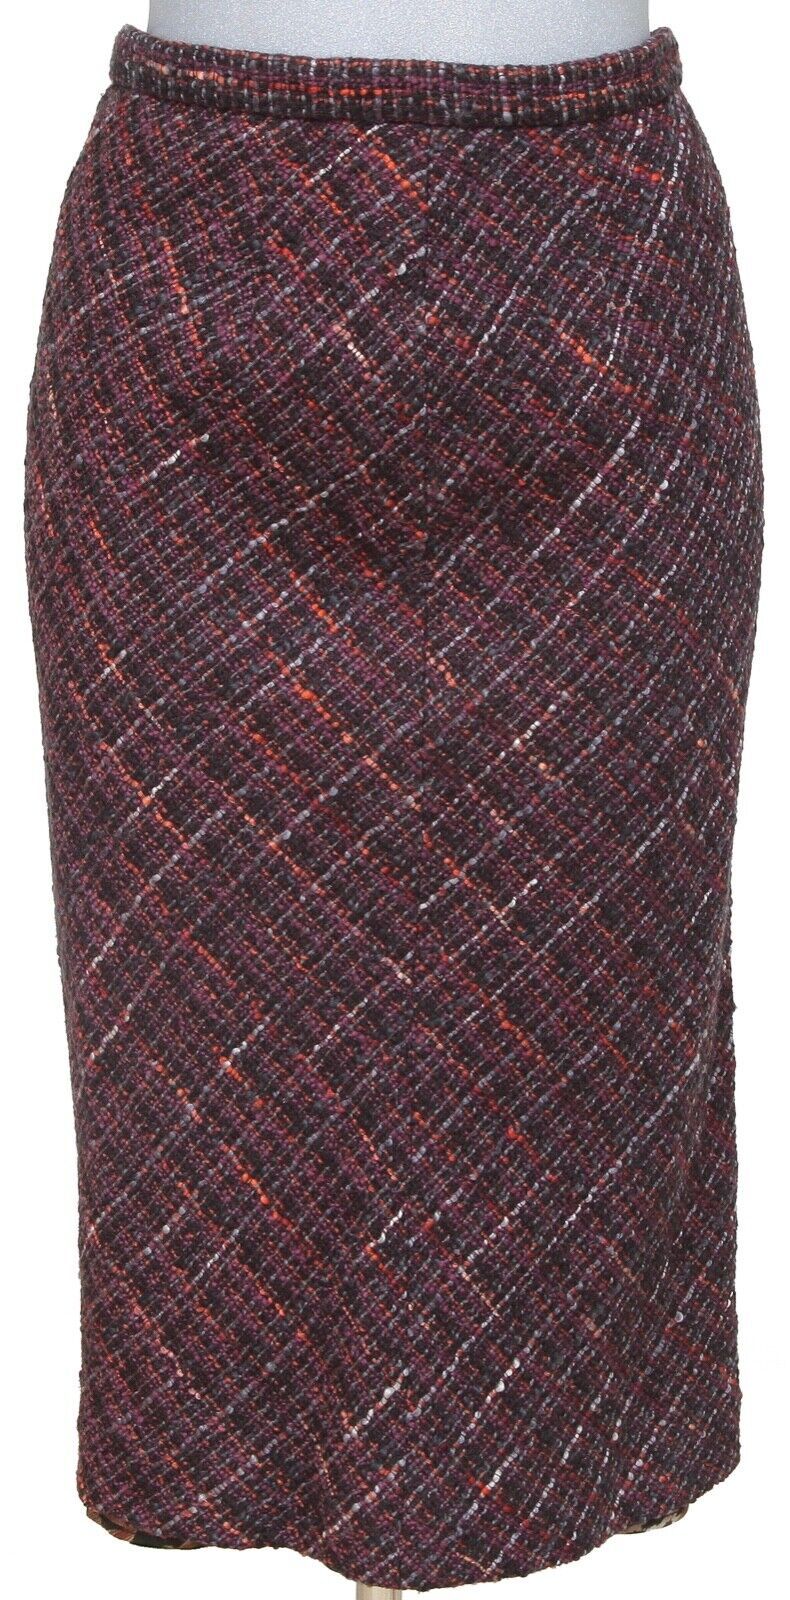 Primary image for DOLCE & GABBANA Tweed Skirt Knee Length Multicolor Leopard Print Sz 42